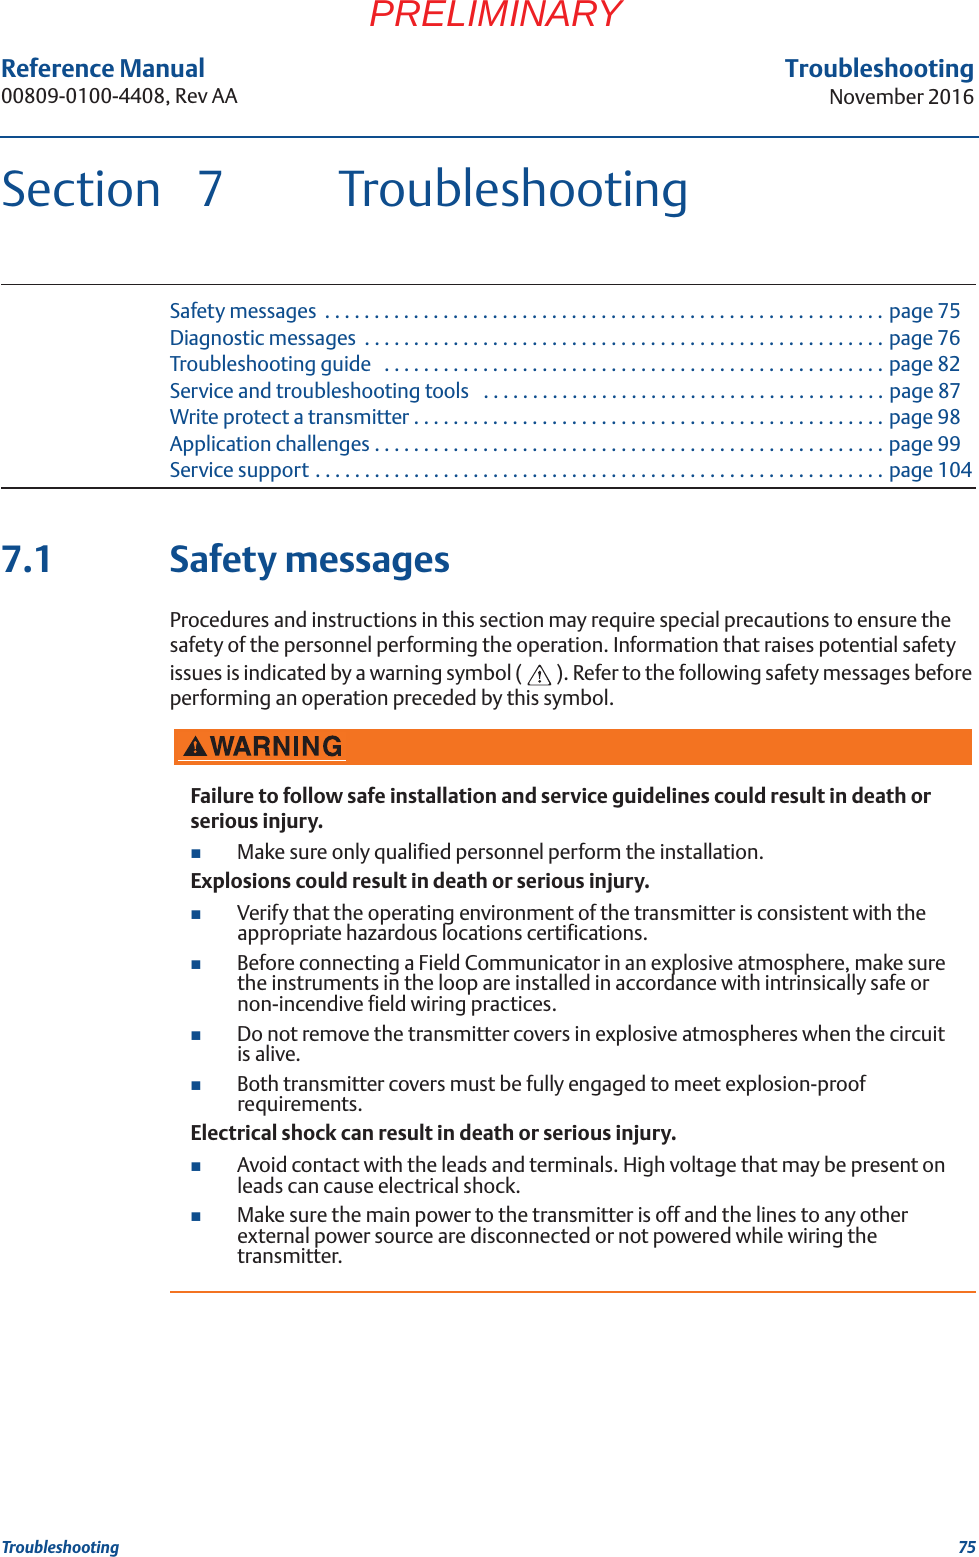 75Reference Manual 00809-0100-4408, Rev AATroubleshootingNovember 2016TroubleshootingPRELIMINARYSection 7 TroubleshootingSafety messages  . . . . . . . . . . . . . . . . . . . . . . . . . . . . . . . . . . . . . . . . . . . . . . . . . . . . . . . . . page 75Diagnostic messages  . . . . . . . . . . . . . . . . . . . . . . . . . . . . . . . . . . . . . . . . . . . . . . . . . . . . . page 76Troubleshooting guide   . . . . . . . . . . . . . . . . . . . . . . . . . . . . . . . . . . . . . . . . . . . . . . . . . . . page 82Service and troubleshooting tools   . . . . . . . . . . . . . . . . . . . . . . . . . . . . . . . . . . . . . . . . . page 87Write protect a transmitter . . . . . . . . . . . . . . . . . . . . . . . . . . . . . . . . . . . . . . . . . . . . . . . . page 98Application challenges . . . . . . . . . . . . . . . . . . . . . . . . . . . . . . . . . . . . . . . . . . . . . . . . . . . . page 99Service support . . . . . . . . . . . . . . . . . . . . . . . . . . . . . . . . . . . . . . . . . . . . . . . . . . . . . . . . . . page 1047.1 Safety messagesProcedures and instructions in this section may require special precautions to ensure the safety of the personnel performing the operation. Information that raises potential safety issues is indicated by a warning symbol ( ). Refer to the following safety messages before performing an operation preceded by this symbol.Failure to follow safe installation and service guidelines could result in death or serious injury.Make sure only qualified personnel perform the installation.Explosions could result in death or serious injury.Verify that the operating environment of the transmitter is consistent with the appropriate hazardous locations certifications.Before connecting a Field Communicator in an explosive atmosphere, make sure the instruments in the loop are installed in accordance with intrinsically safe or non-incendive field wiring practices.Do not remove the transmitter covers in explosive atmospheres when the circuit is alive.Both transmitter covers must be fully engaged to meet explosion-proof requirements.Electrical shock can result in death or serious injury.Avoid contact with the leads and terminals. High voltage that may be present on leads can cause electrical shock.Make sure the main power to the transmitter is off and the lines to any other external power source are disconnected or not powered while wiring the transmitter.